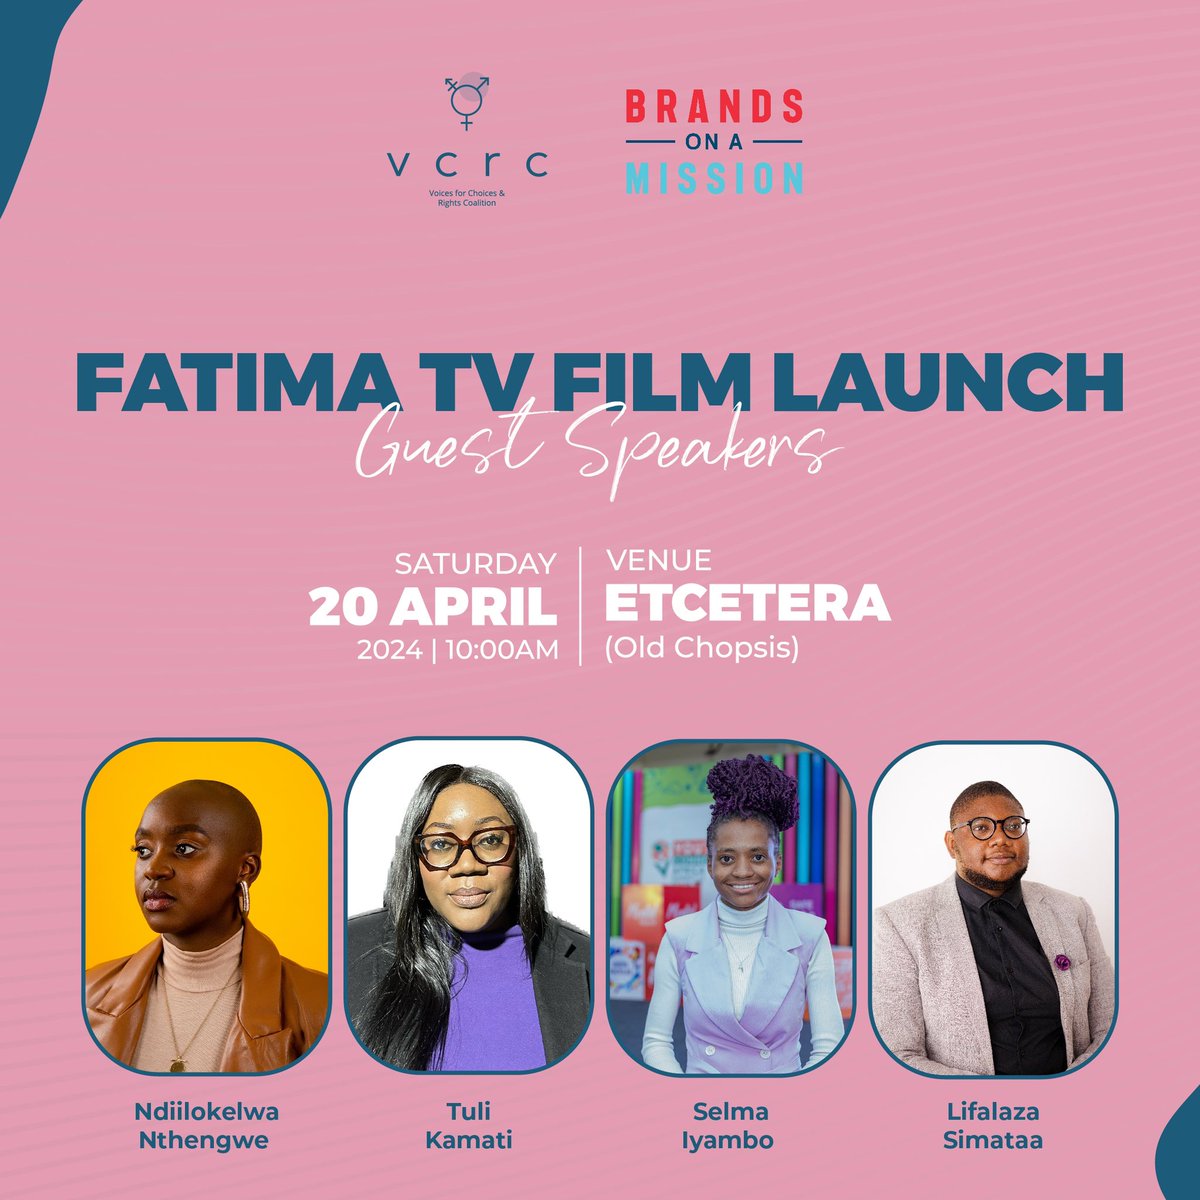 📣FATIMA TV FILM LAUNCH📣 GUEST SPEAKERS with a rich background in SRHR, Activism, Media and Politics will be filling up our program at the launch this Saturday. Have you registered yet? Registration: forms.gle/oMDBYZbEByFx5A…. #FatimaTV #FilmLaunch #VCRC #BOAM